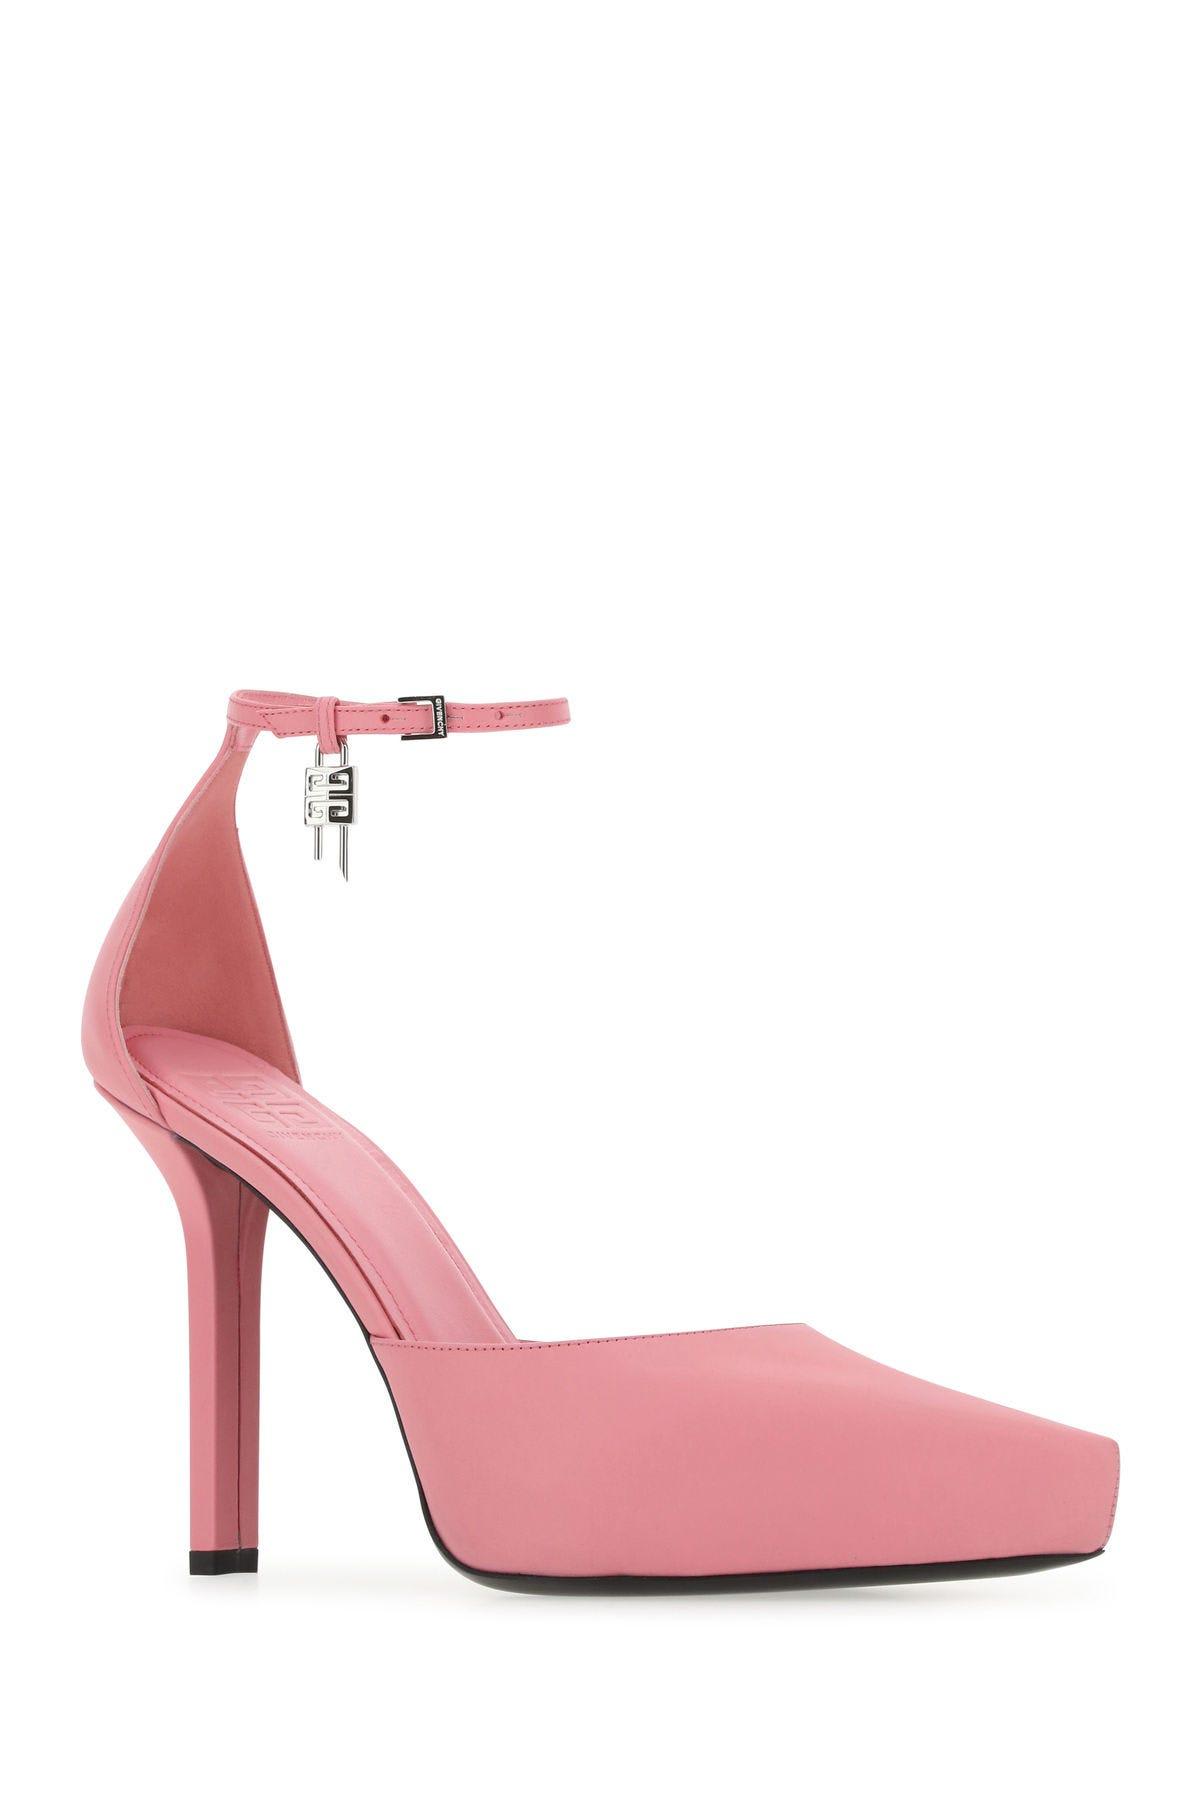 Shop Givenchy Pink Leather G-lock Pumps